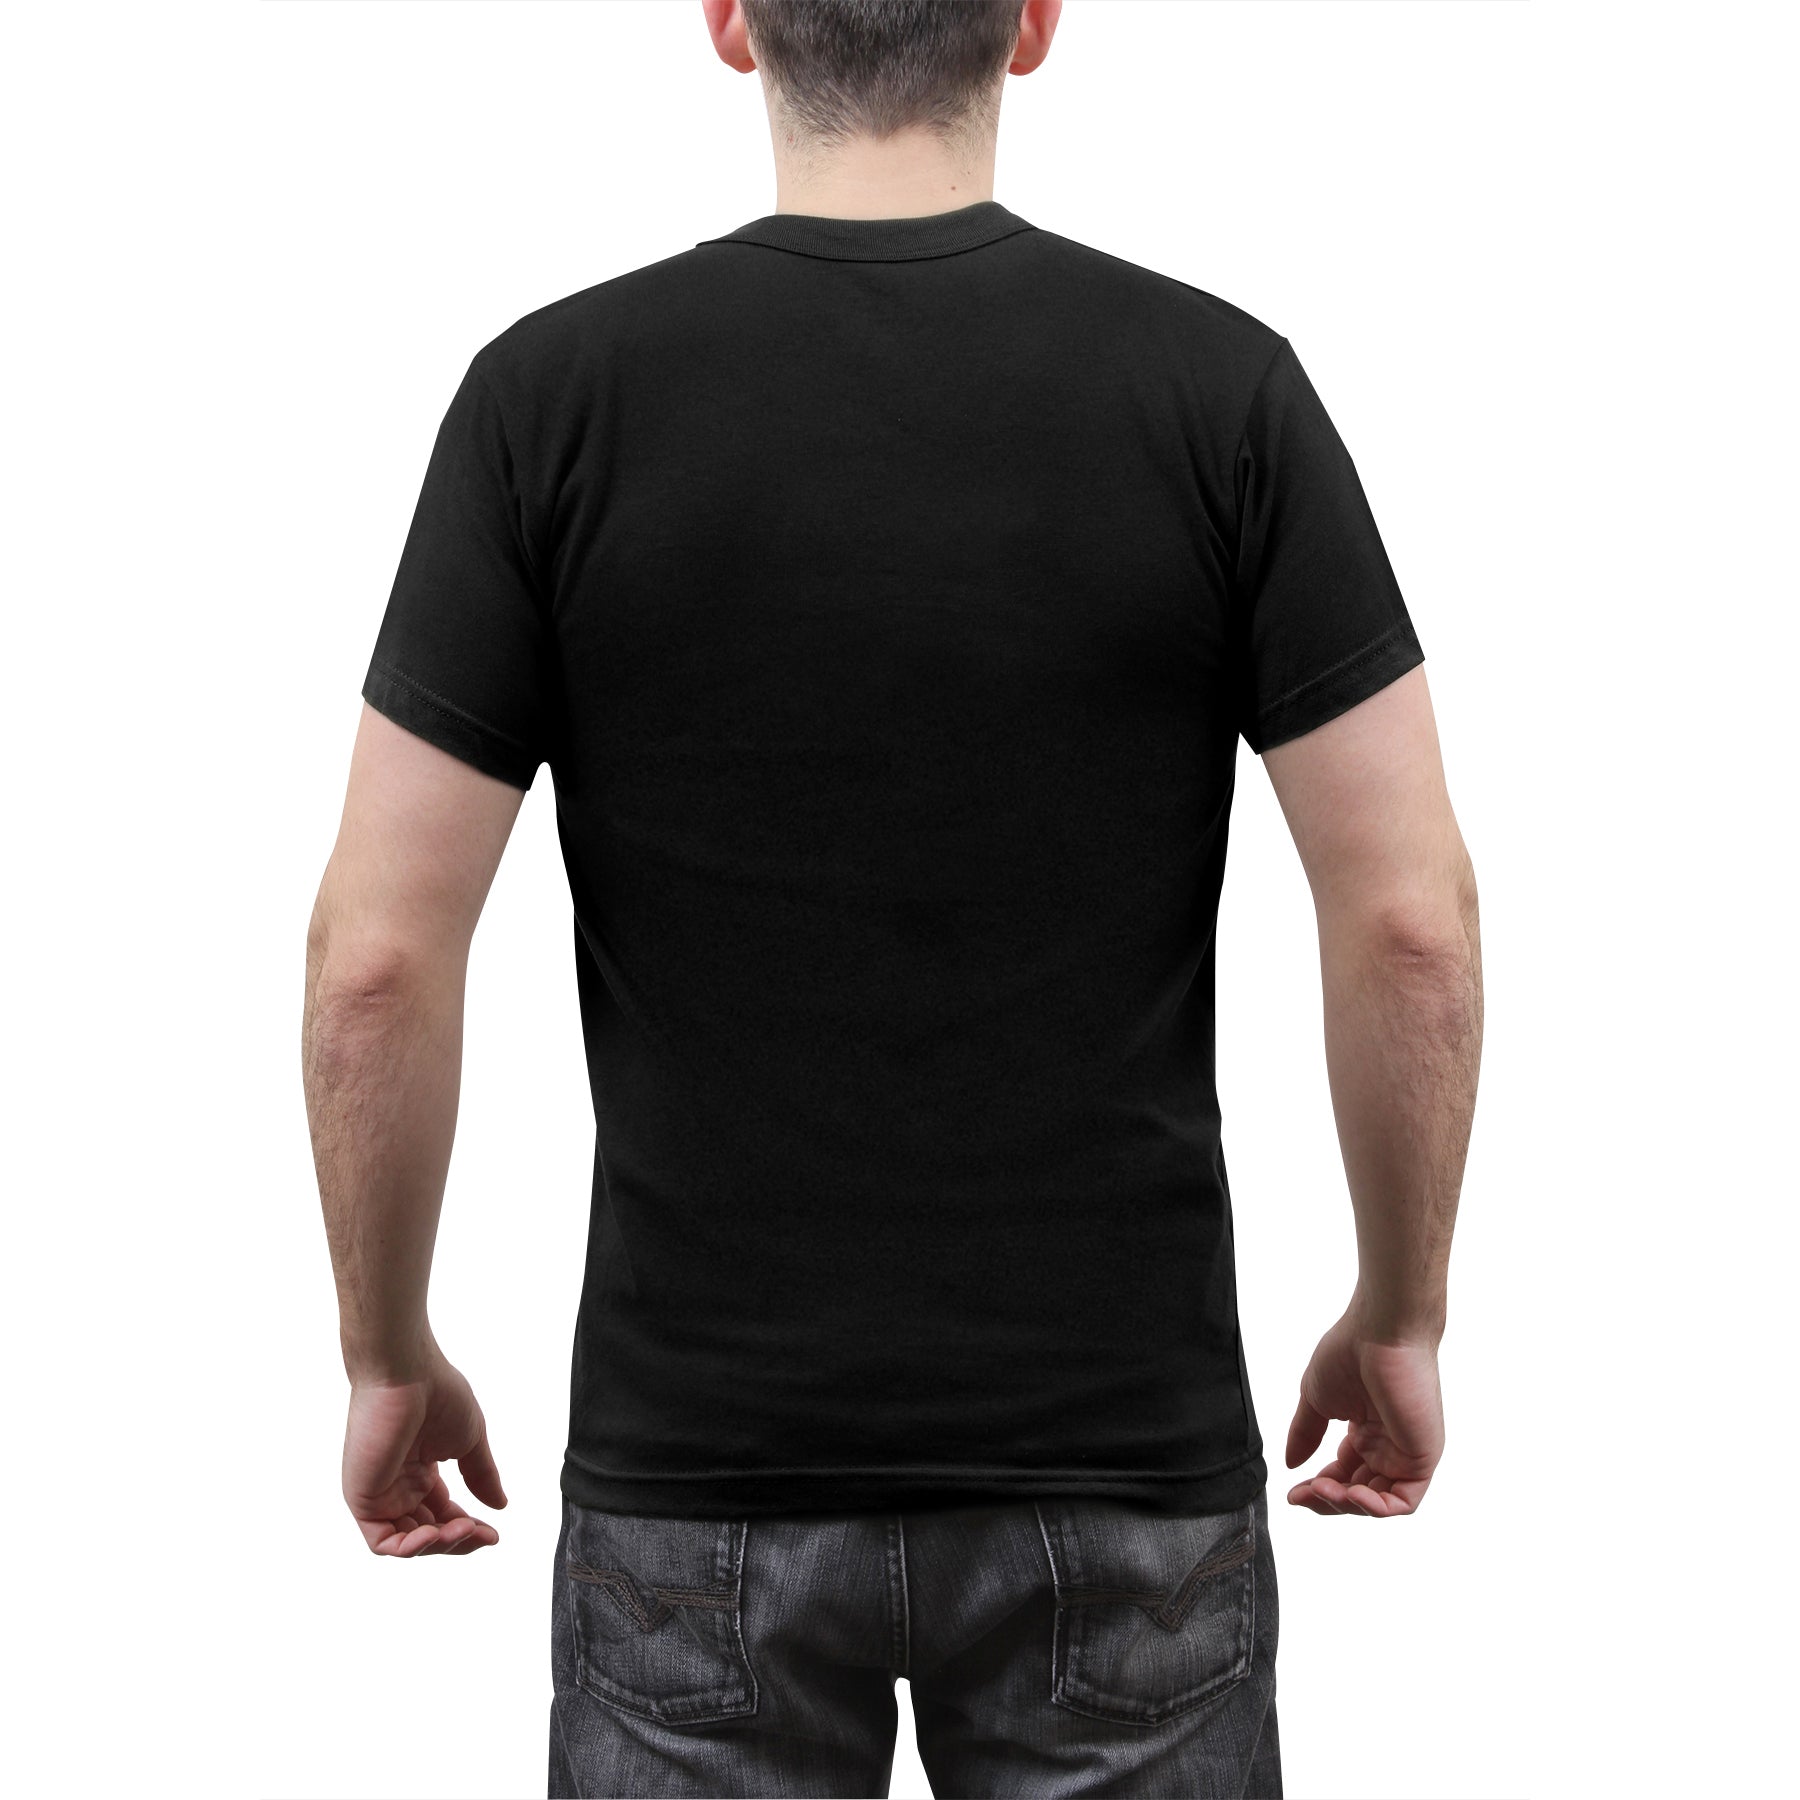 Rothco 2-Sided Police T-Shirt - Tactical Choice Plus